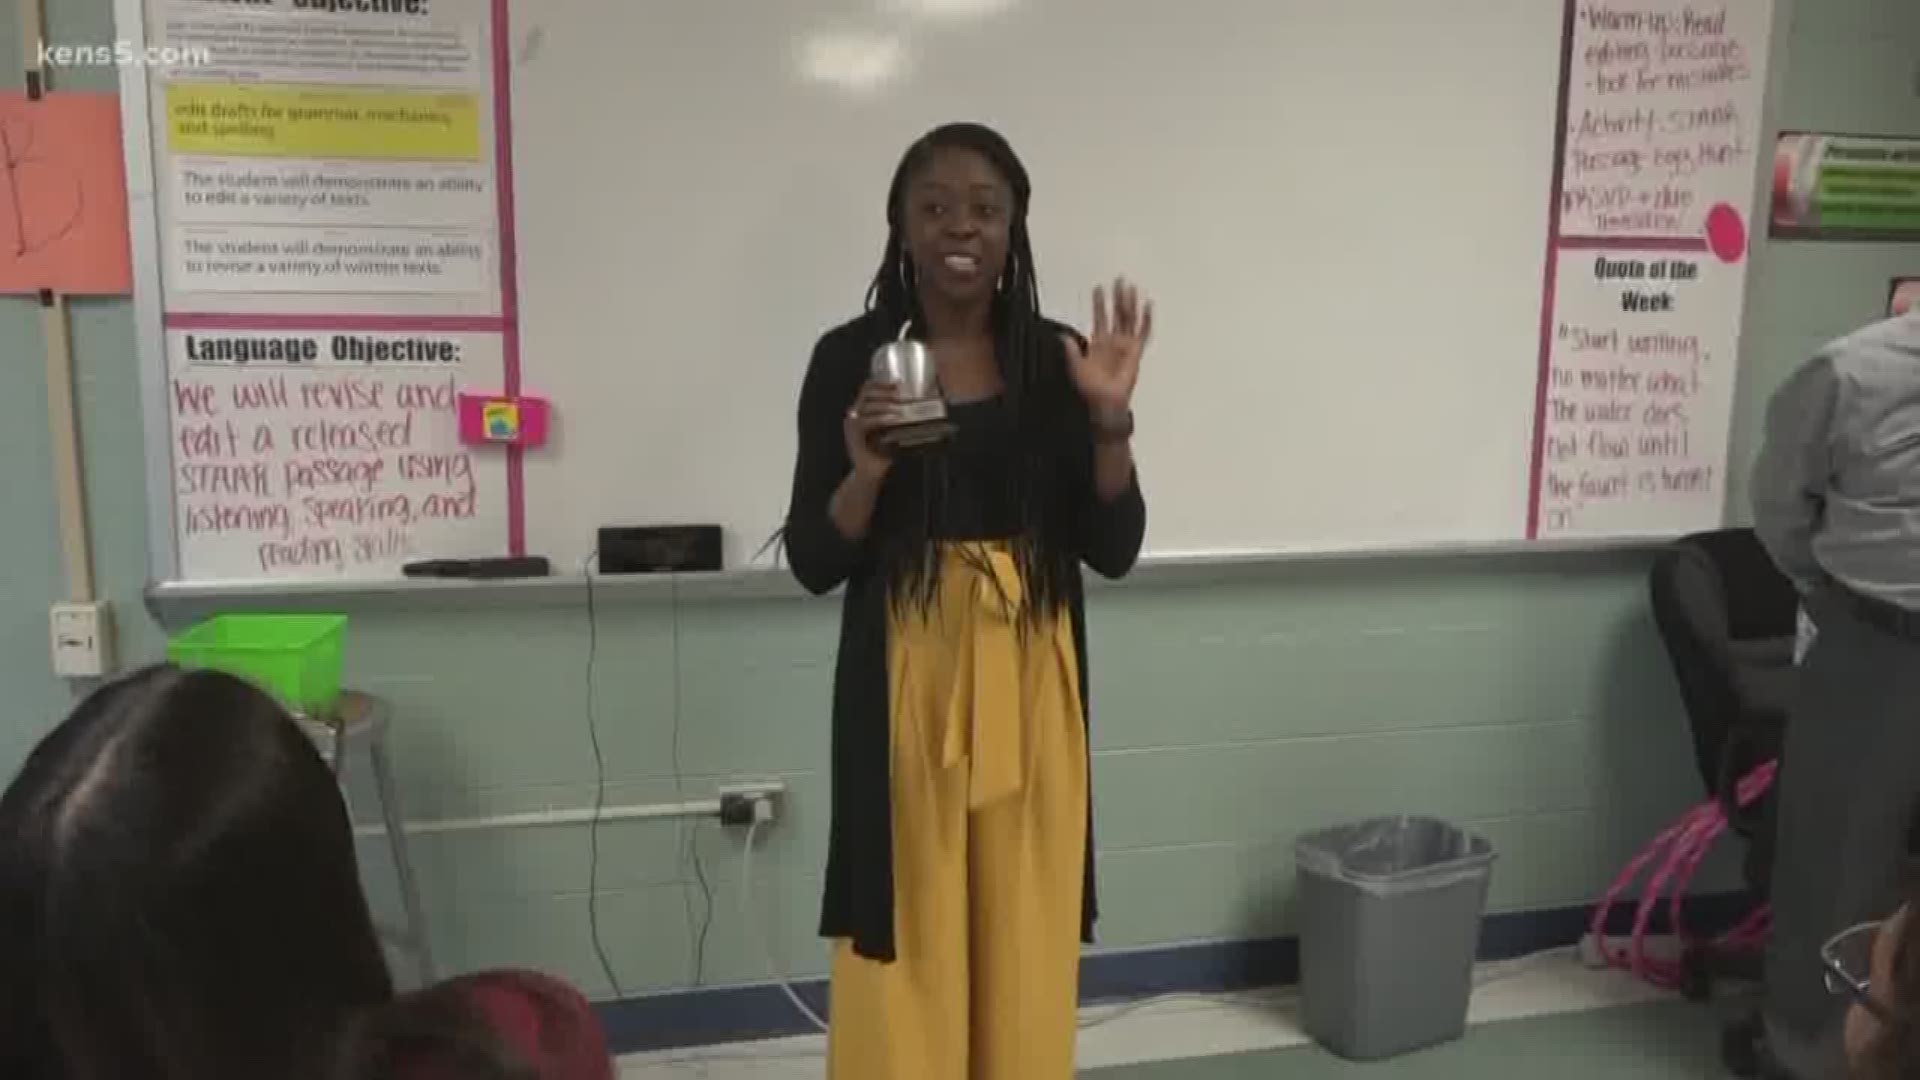 Olivia Robinson's students are hungry to learn under her relatable and engaging style of teaching. Marvin Hurst introduces us to the incomparable Ms. Robinson.